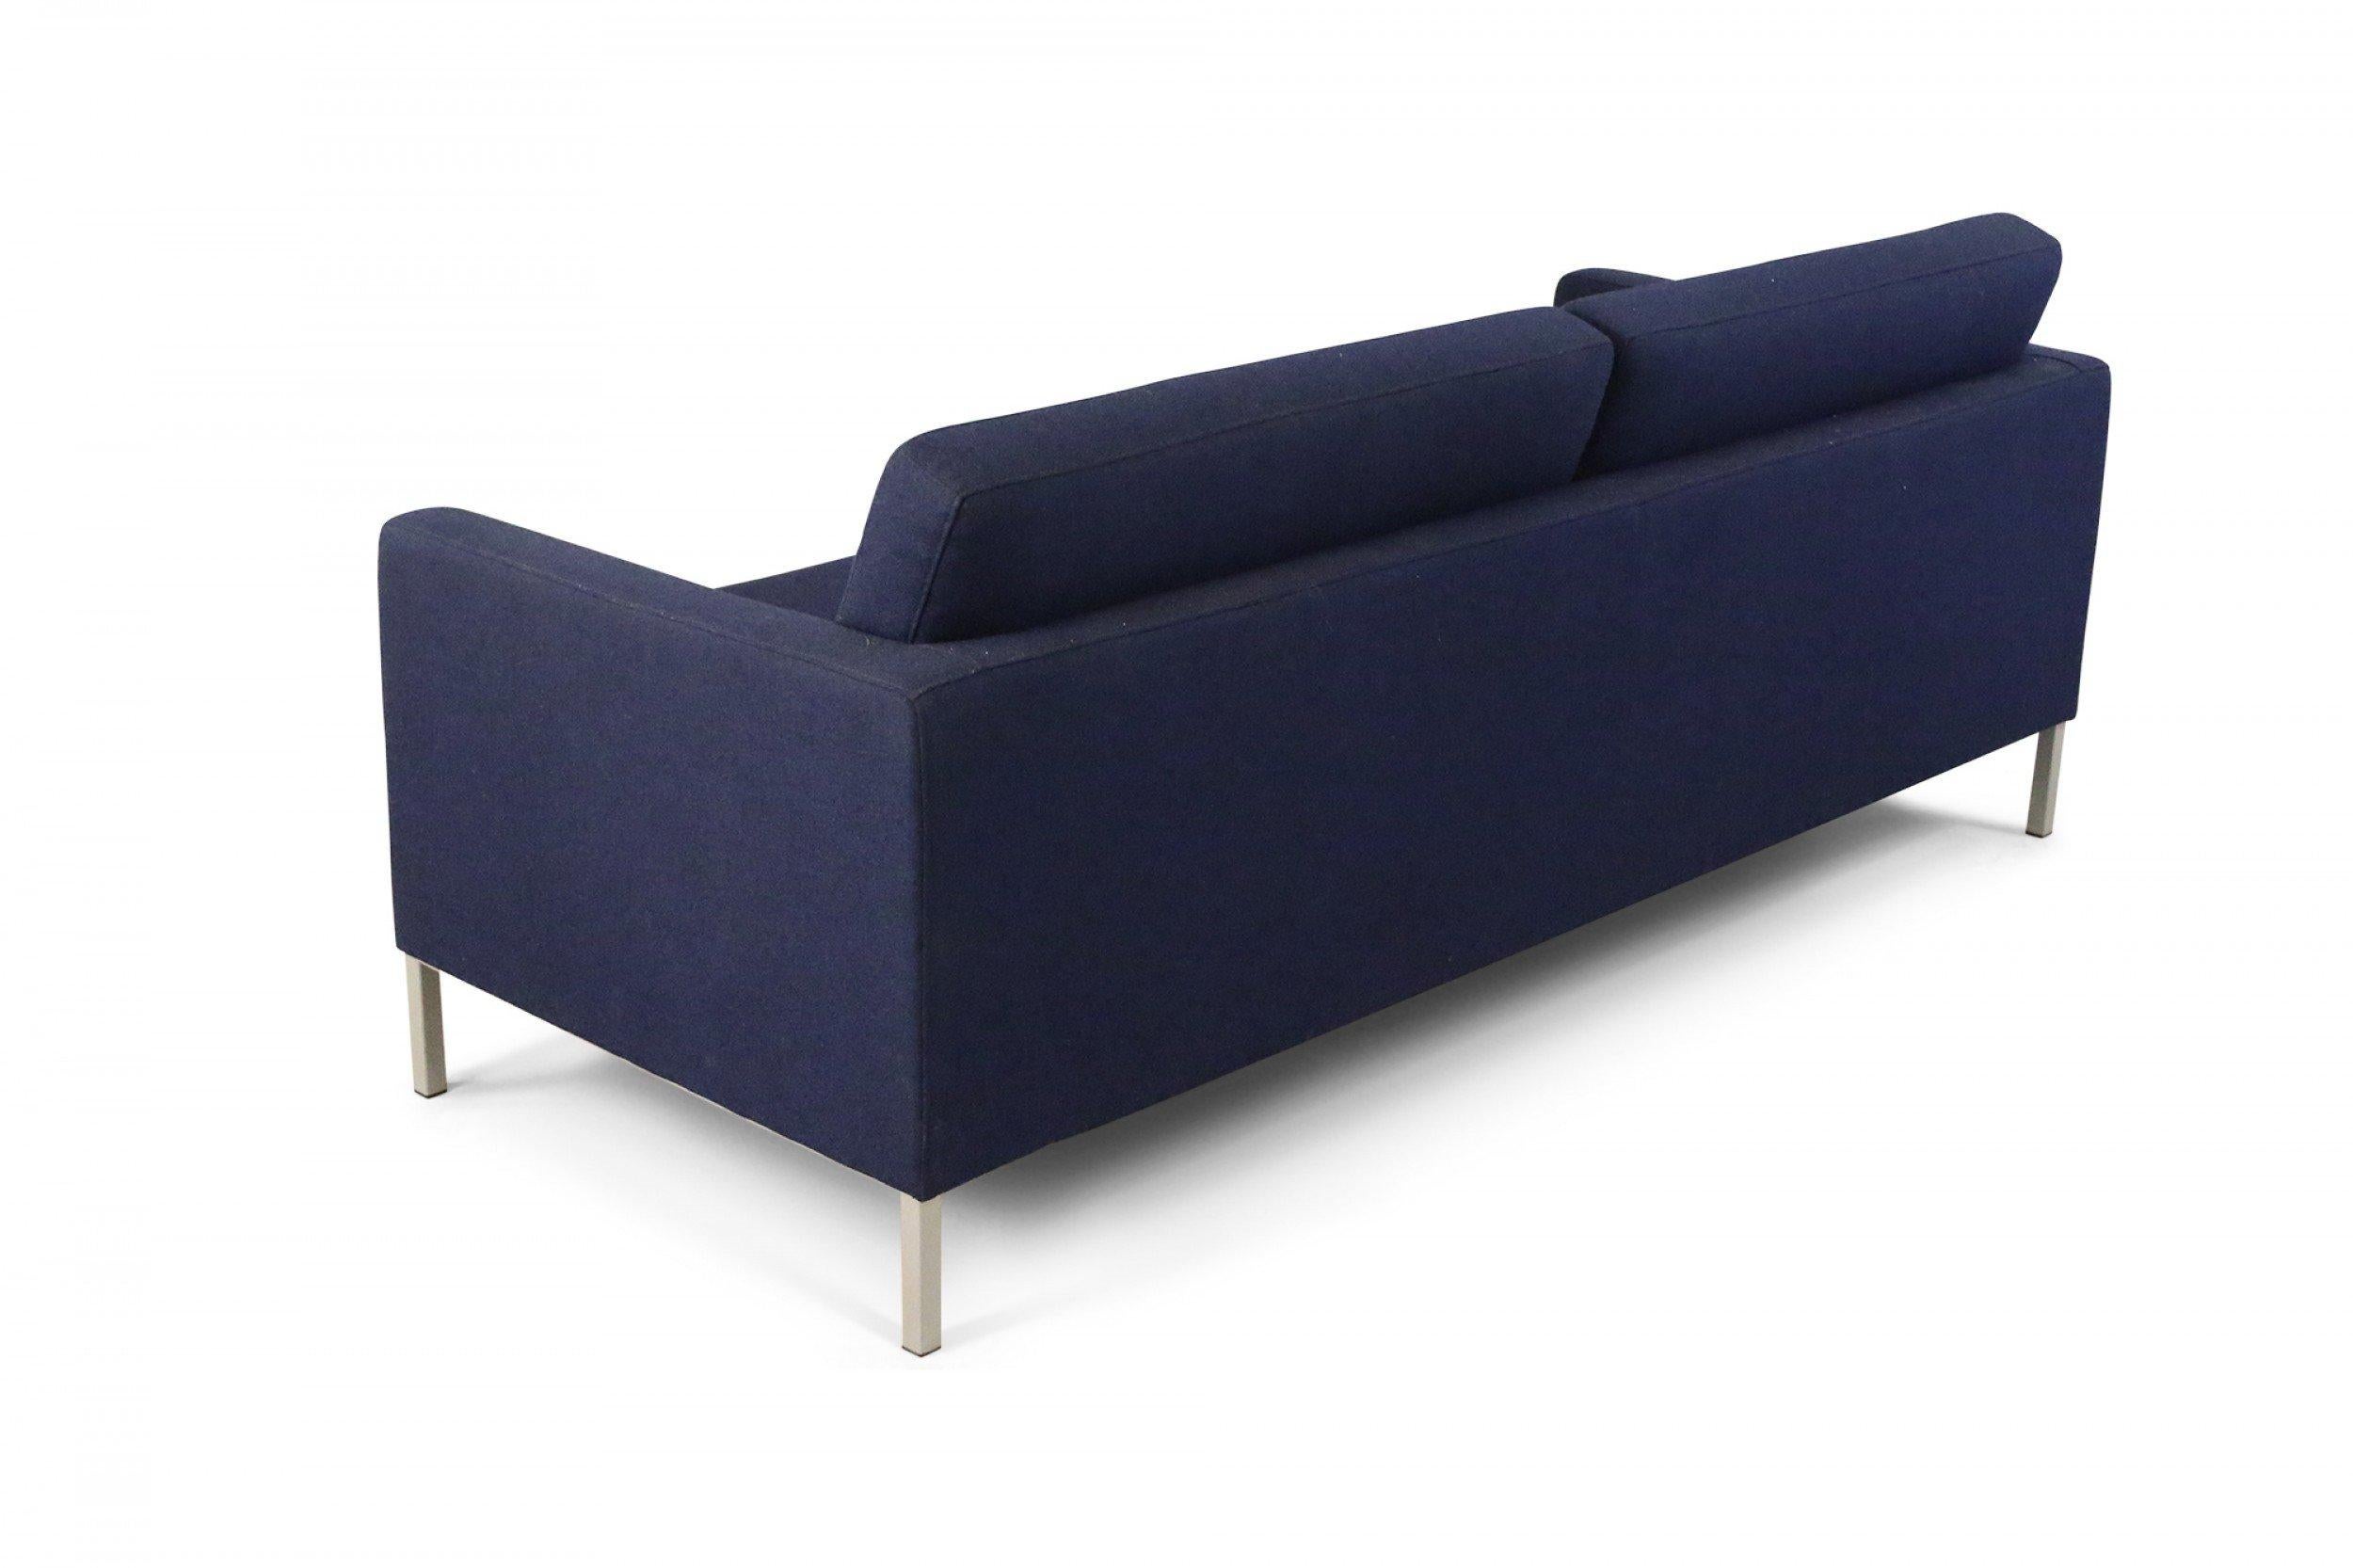 20th Century Contemporary Navy Blue Upholstered Three-Seat Sofa For Sale